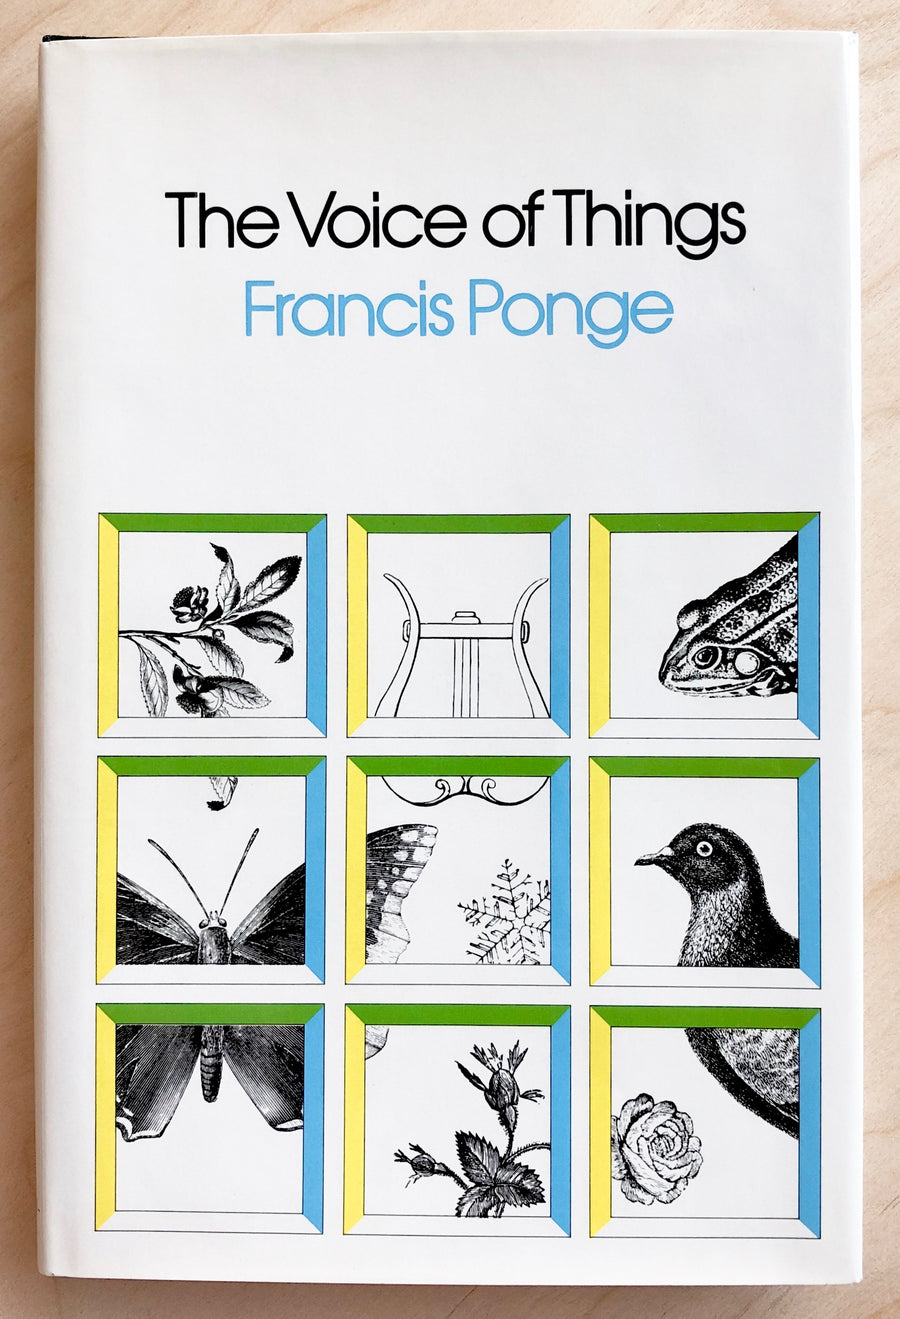 THE VOICE OF THINGS by Francis Ponge